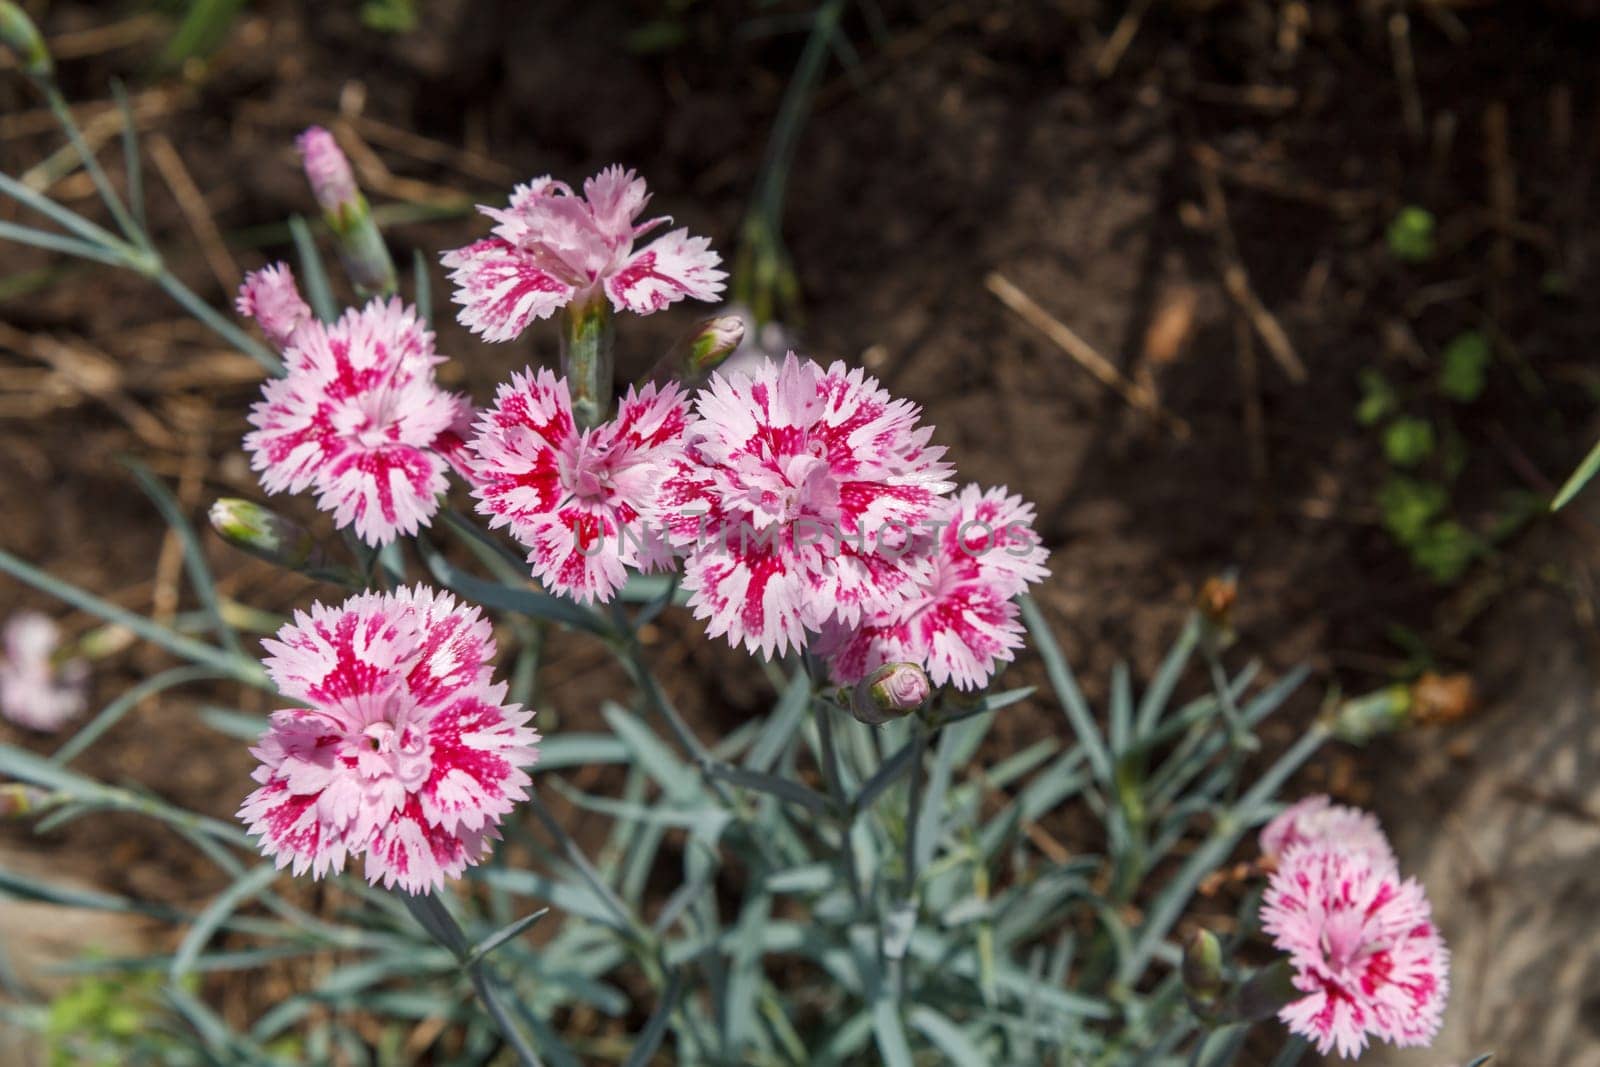 Pink clove flowers in a ground on the garden bed. by mvg6894